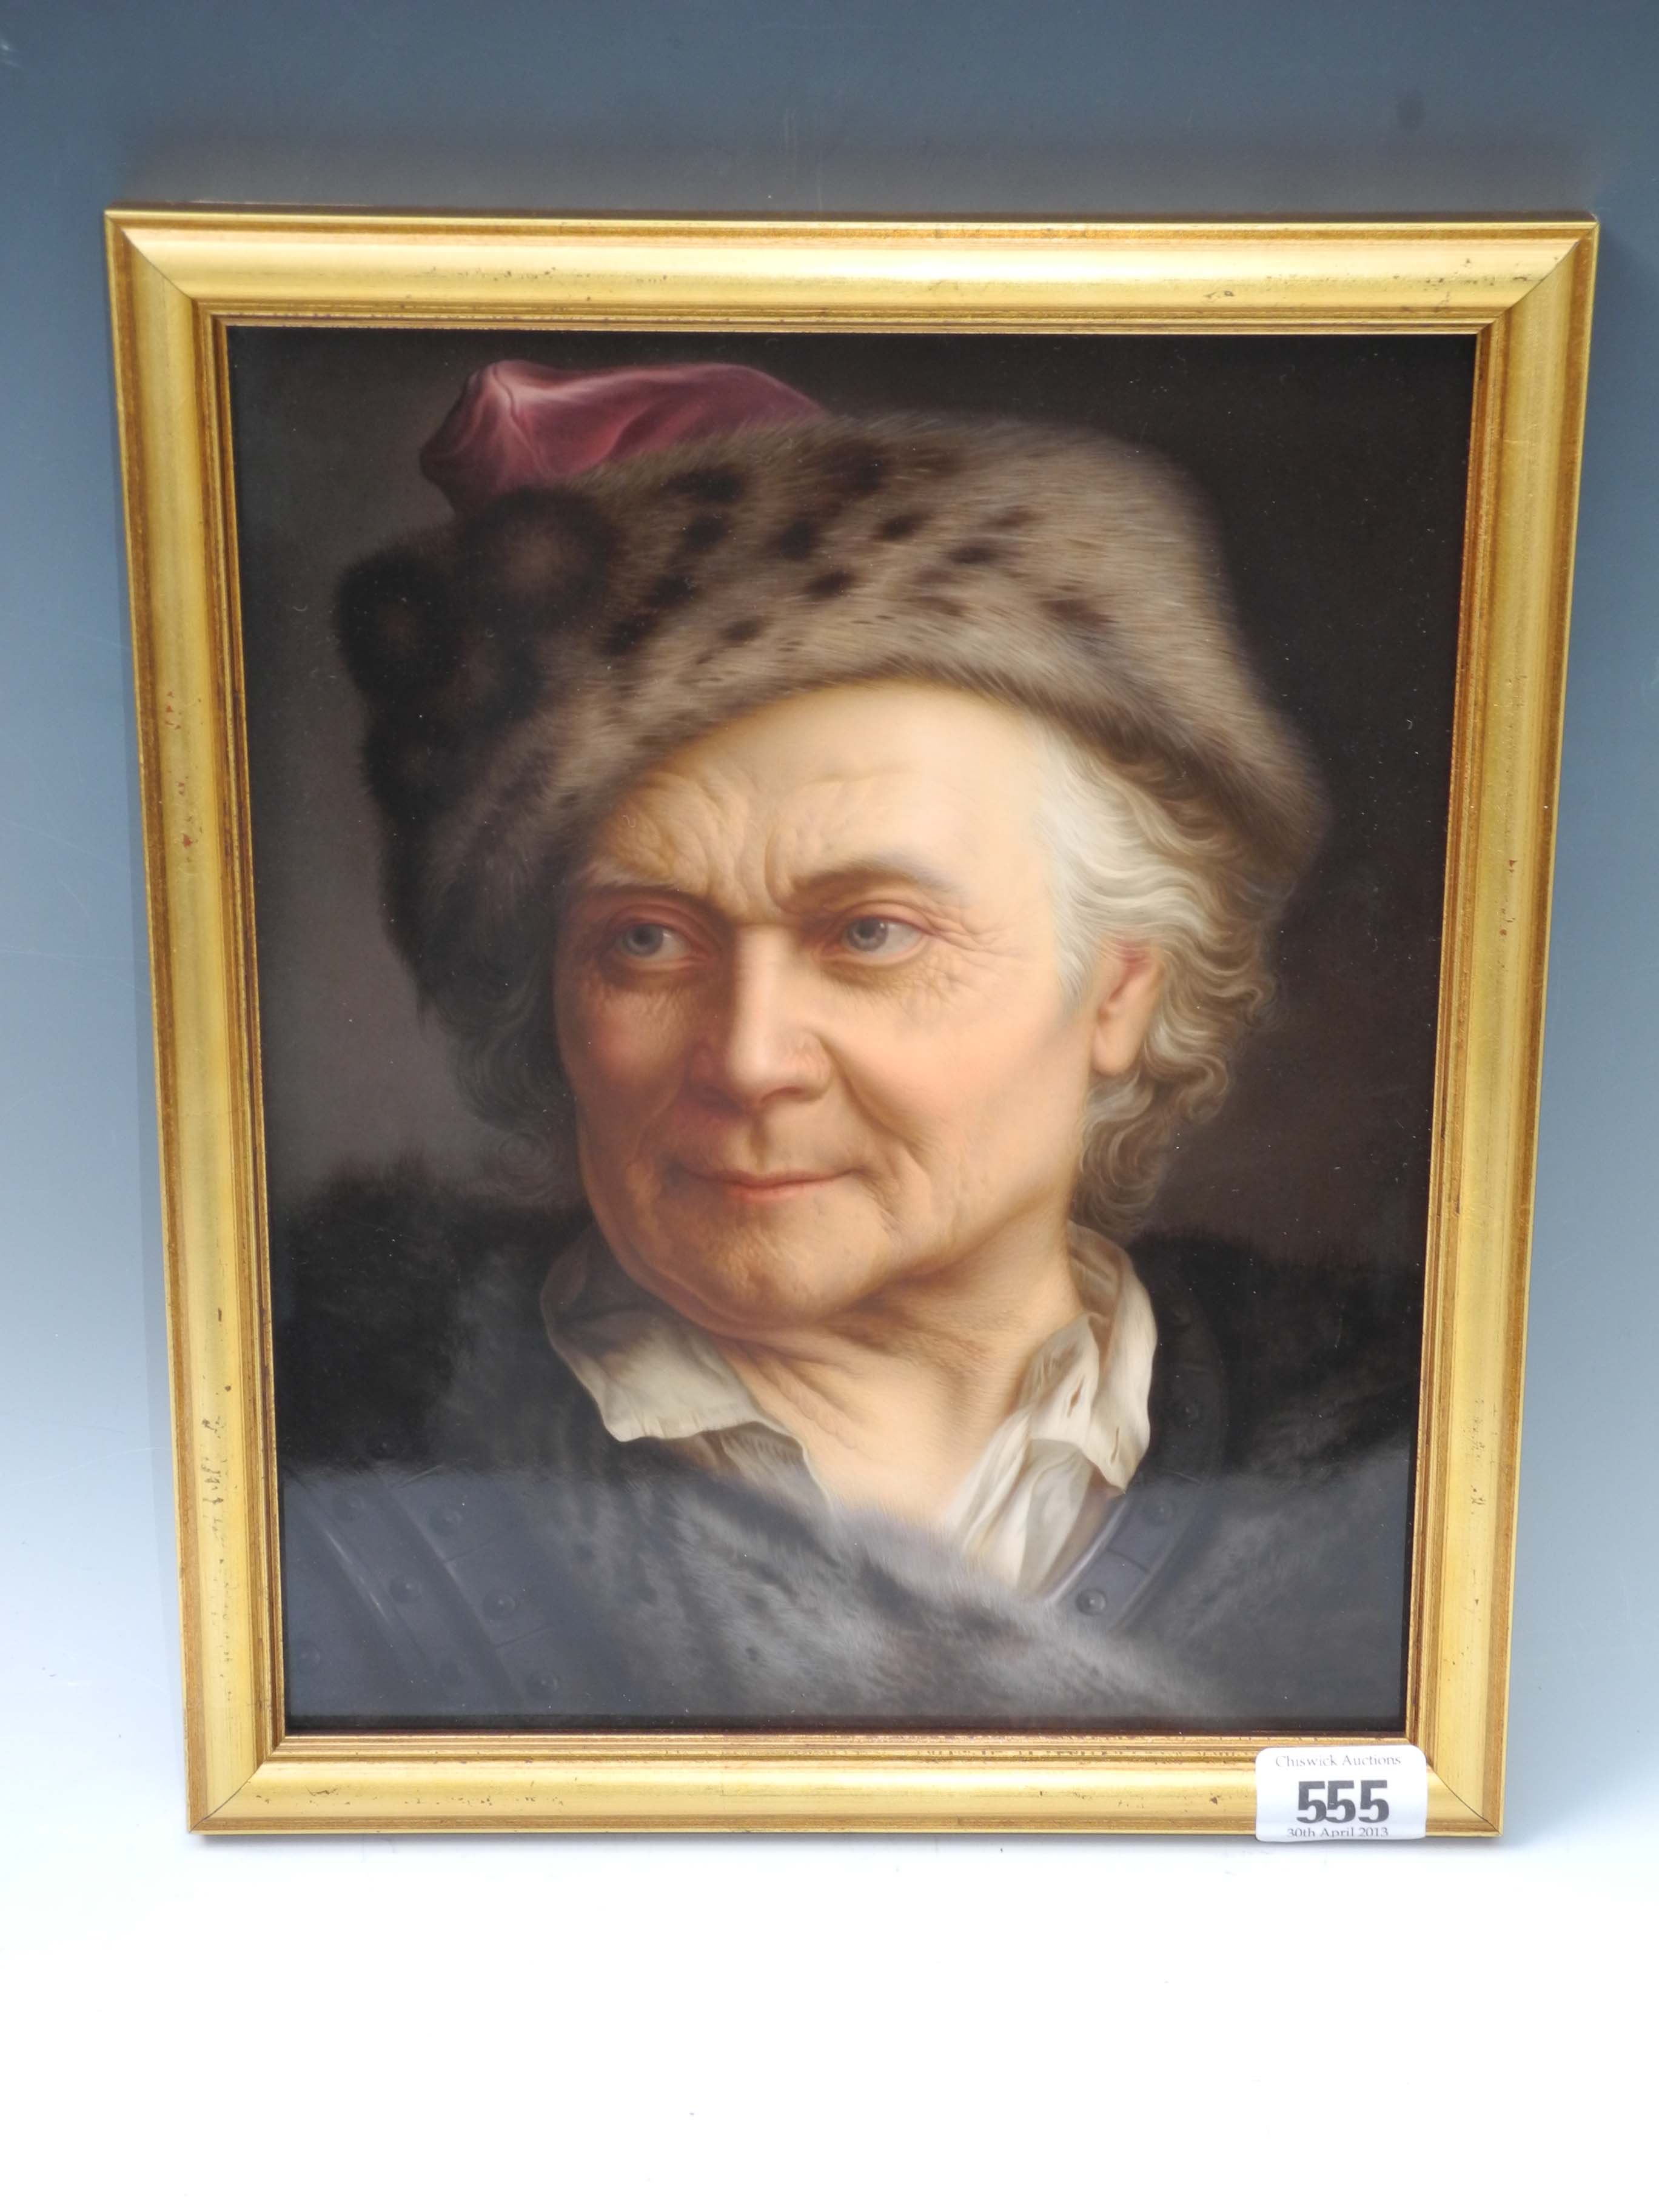 A 19th Century KPM porcelain portrait plaque of an elderly man with fur hunting cap, signed lower